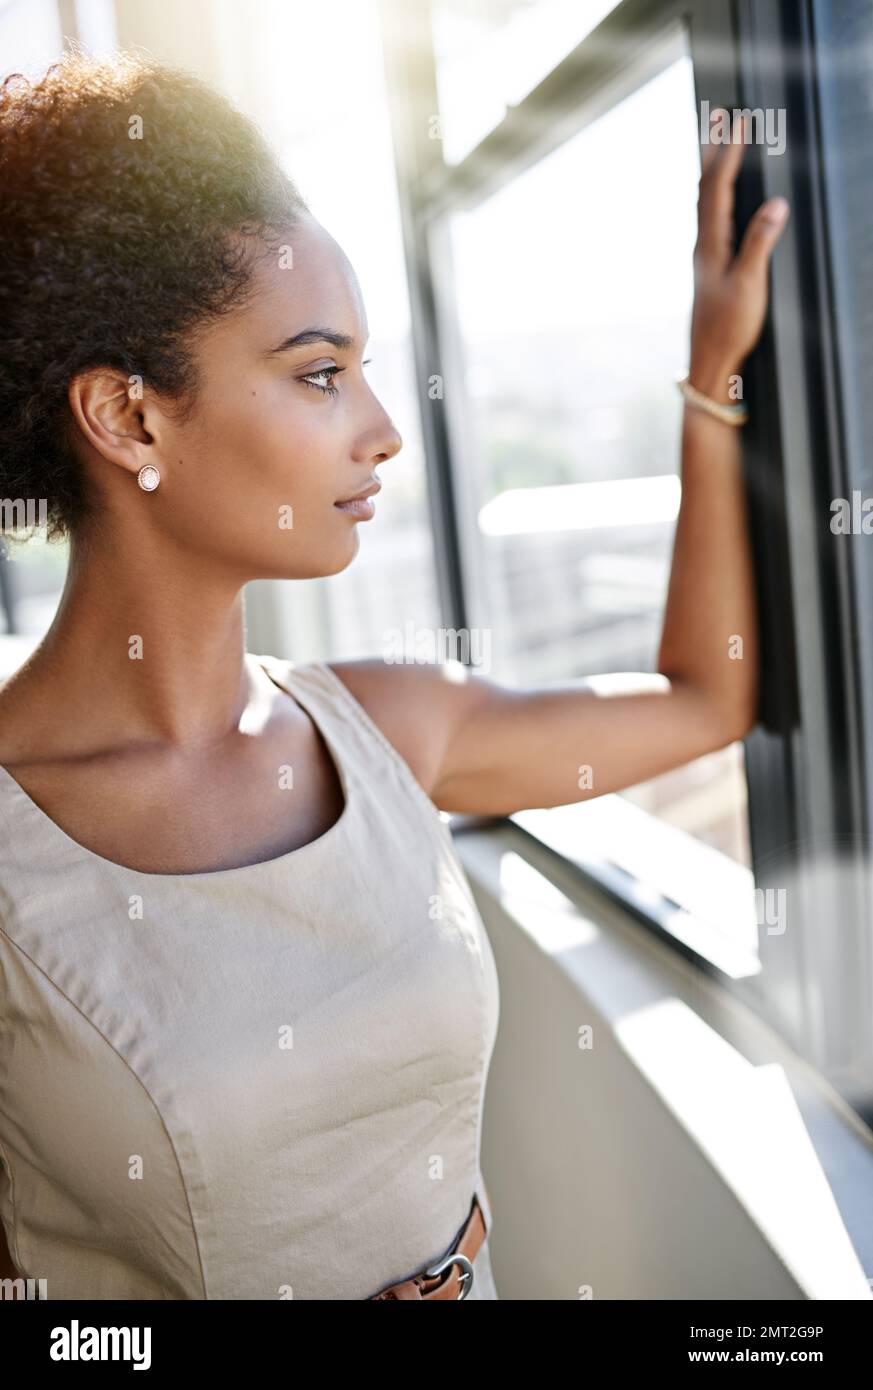 Driven to succeed. an ambitious young businesswoman looking through her office window. Stock Photo